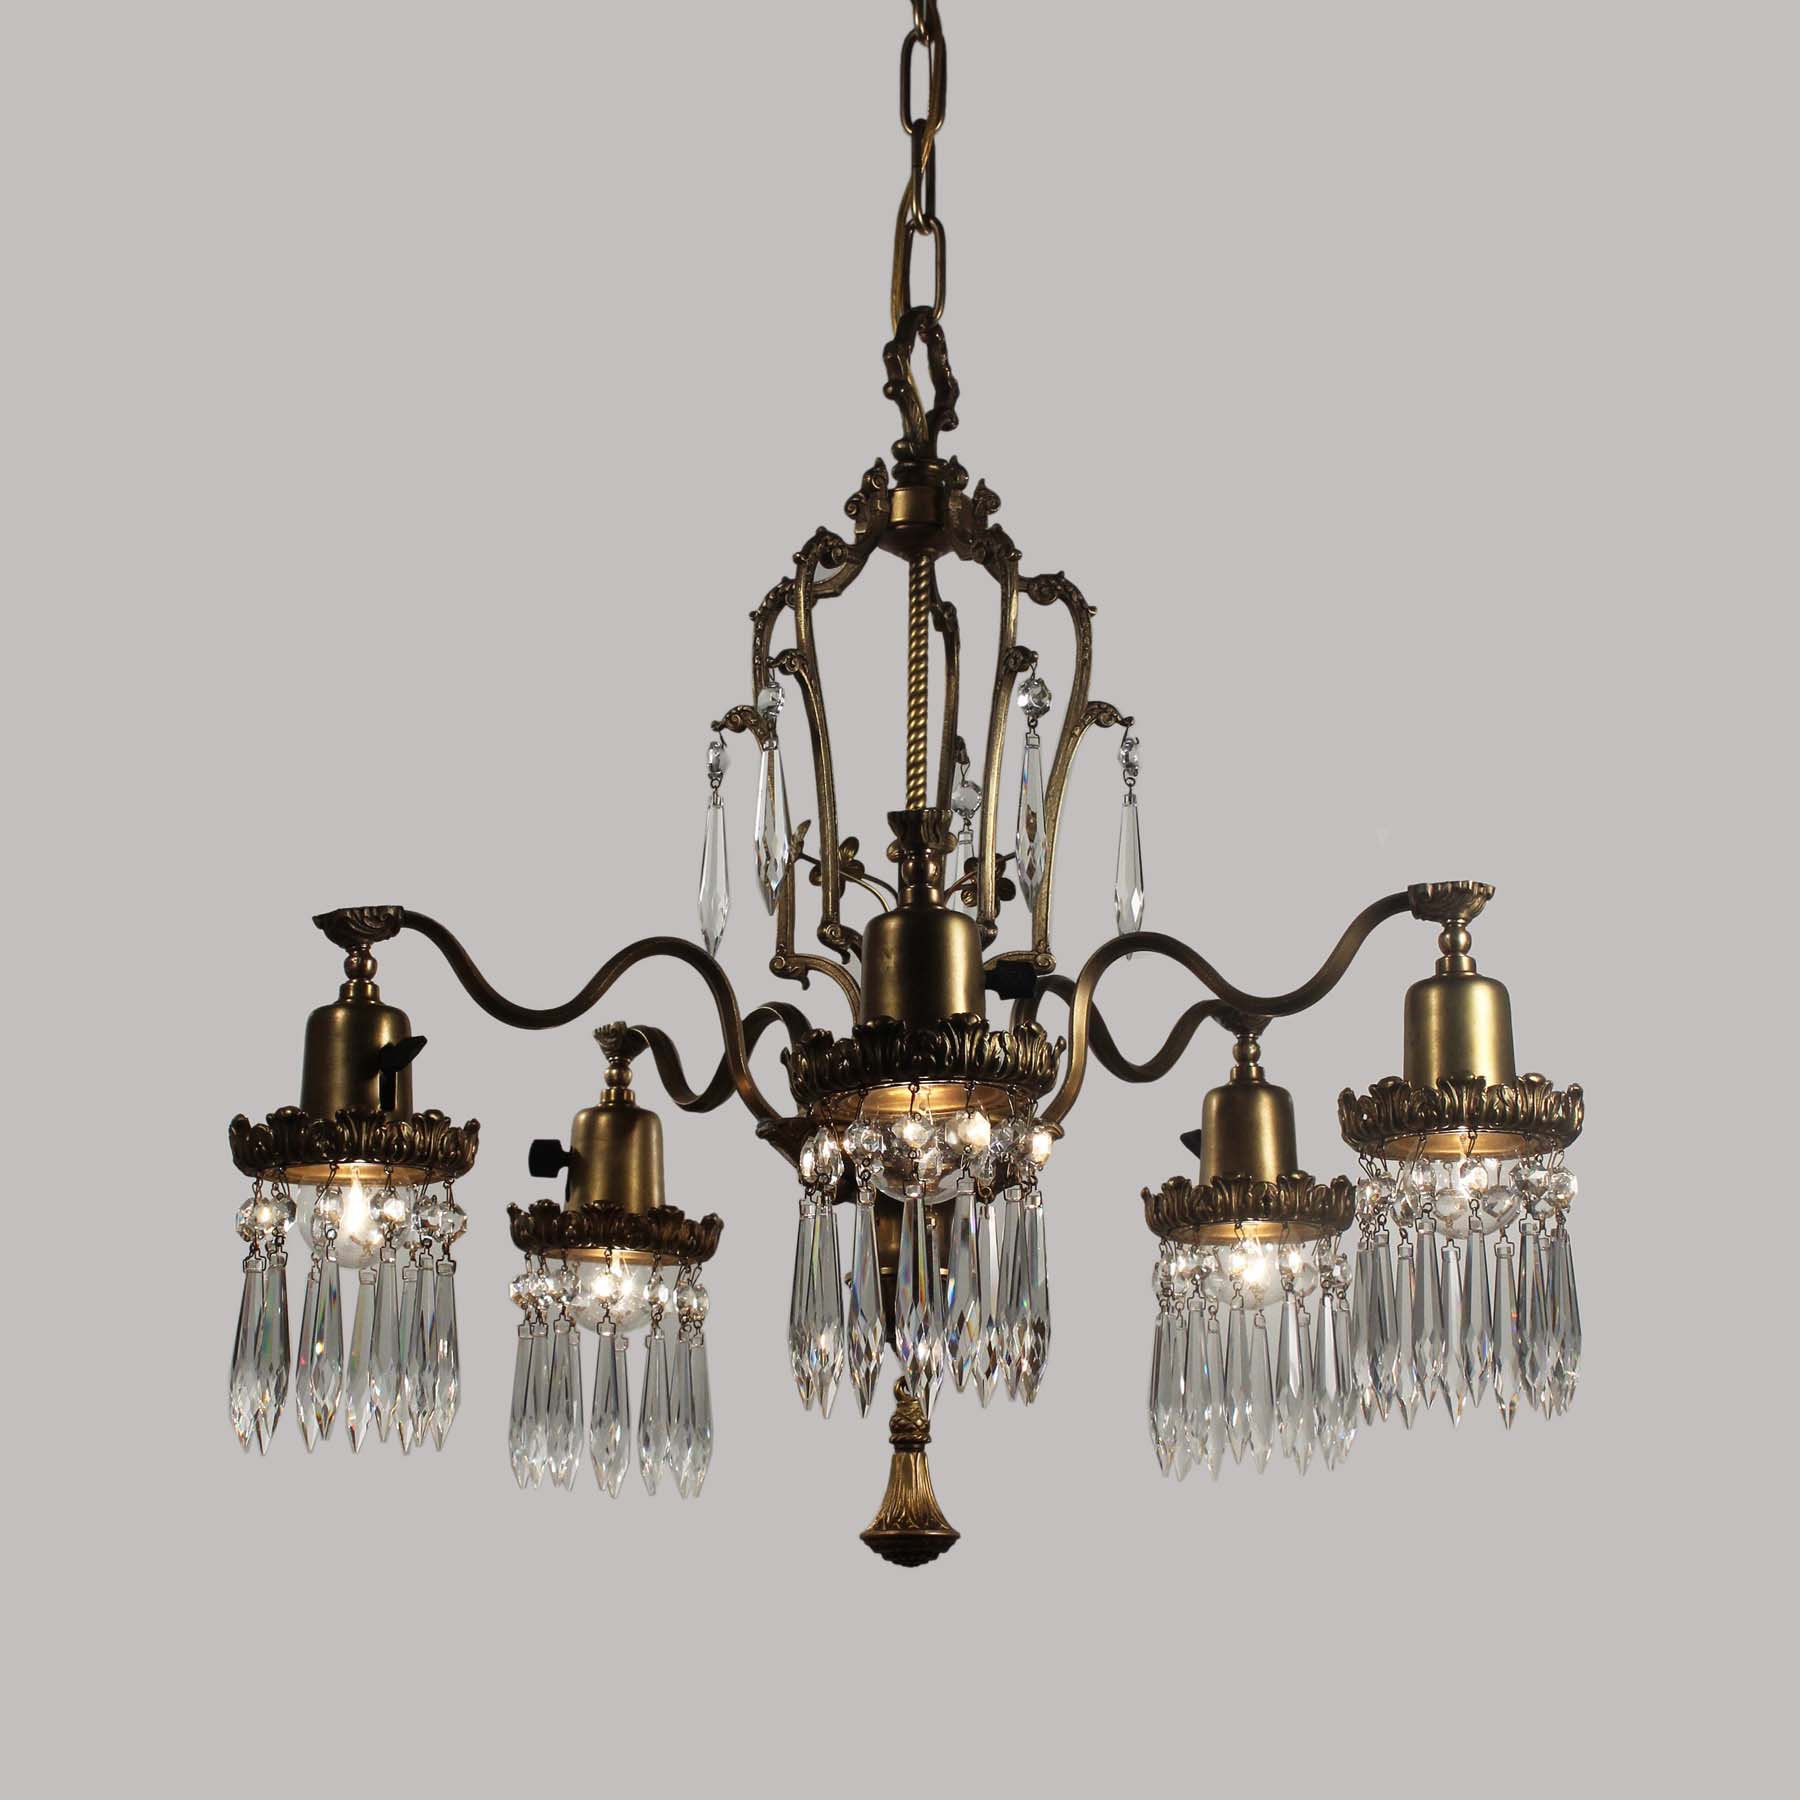 SOLD Neoclassical Chandelier with Prisms, Antique Lighting-67445